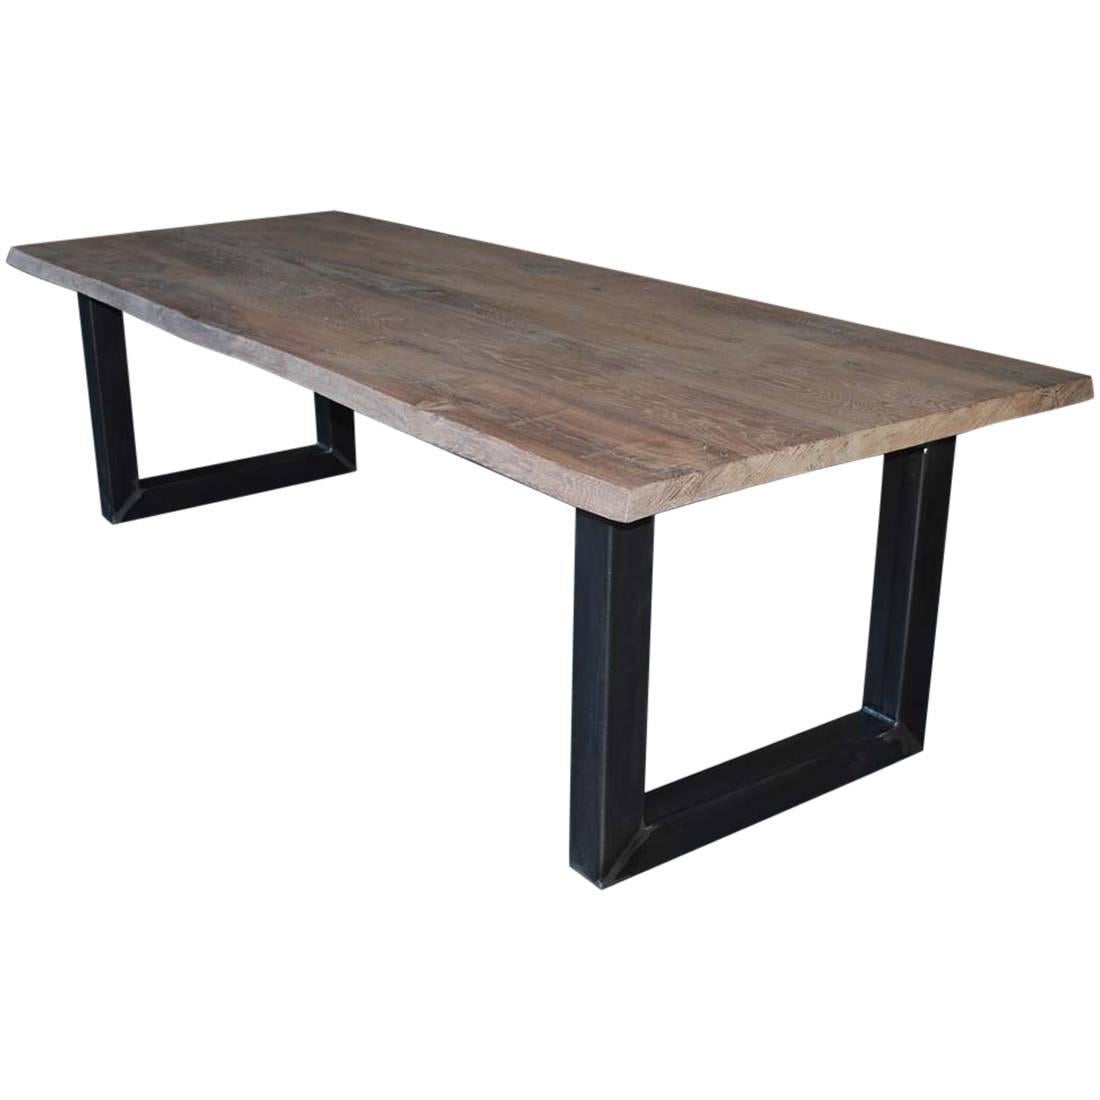 Contemporary Oakwood Tree-Trunk Table, Handcrafted